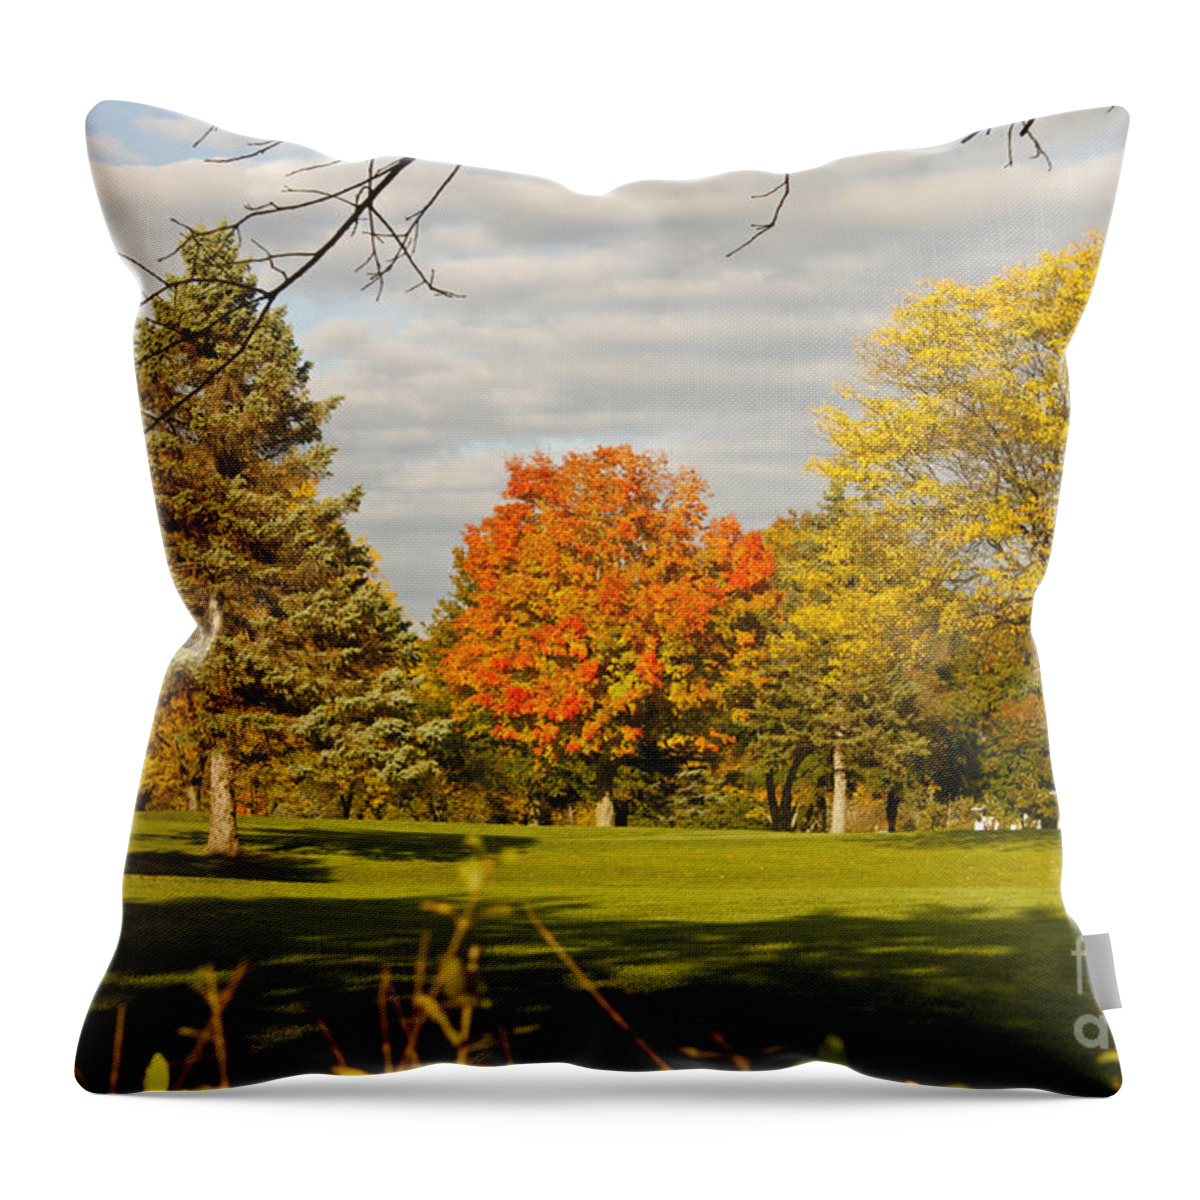 Fall Foliage Throw Pillow featuring the photograph Corning Fall Foliage 5 by Tom Doud